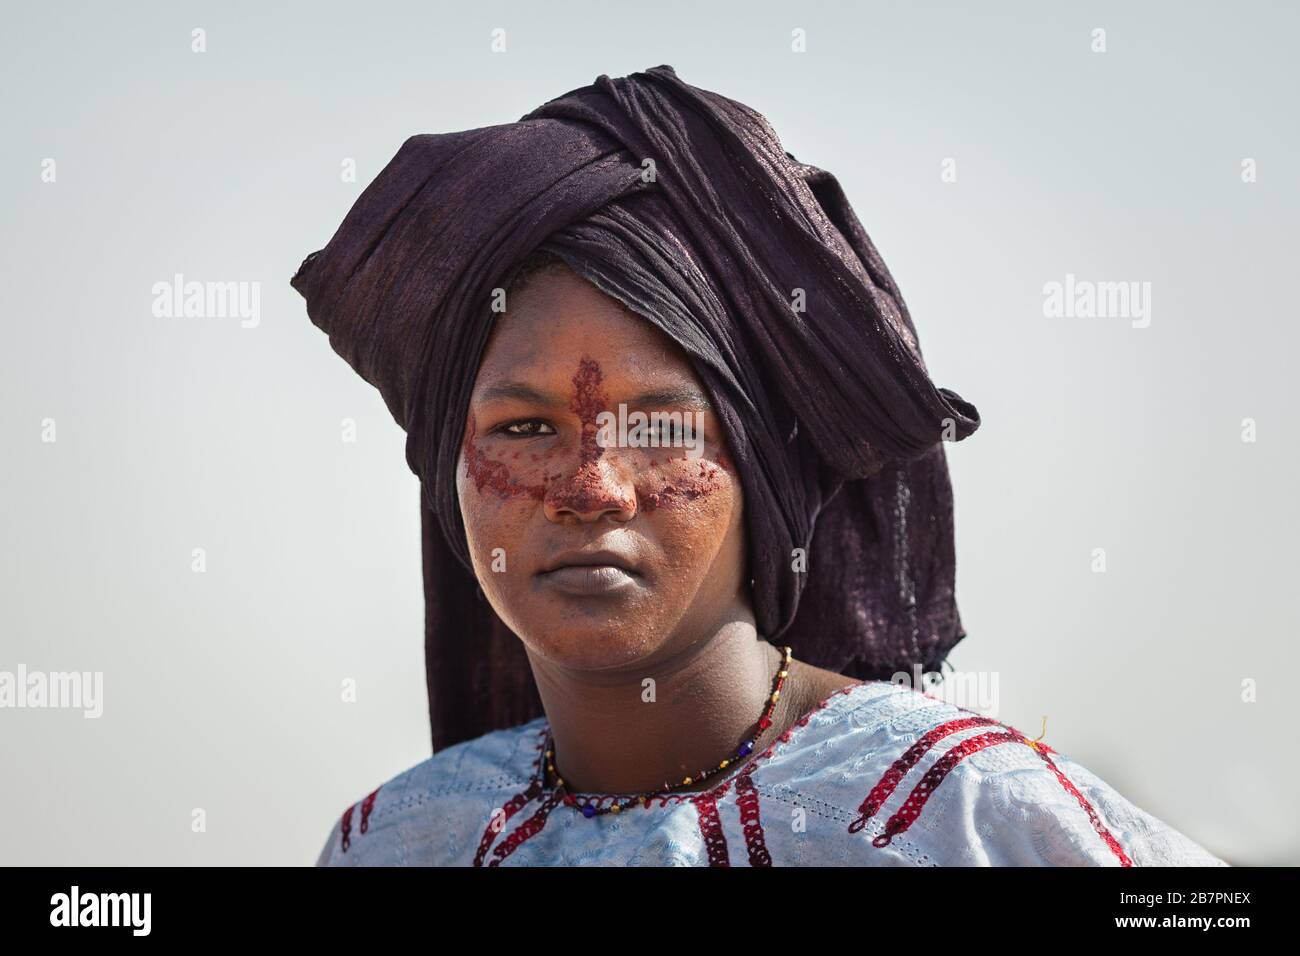 Ingall, Niger - september 2013: Fulani girl in traditional turban close up Stock Photo